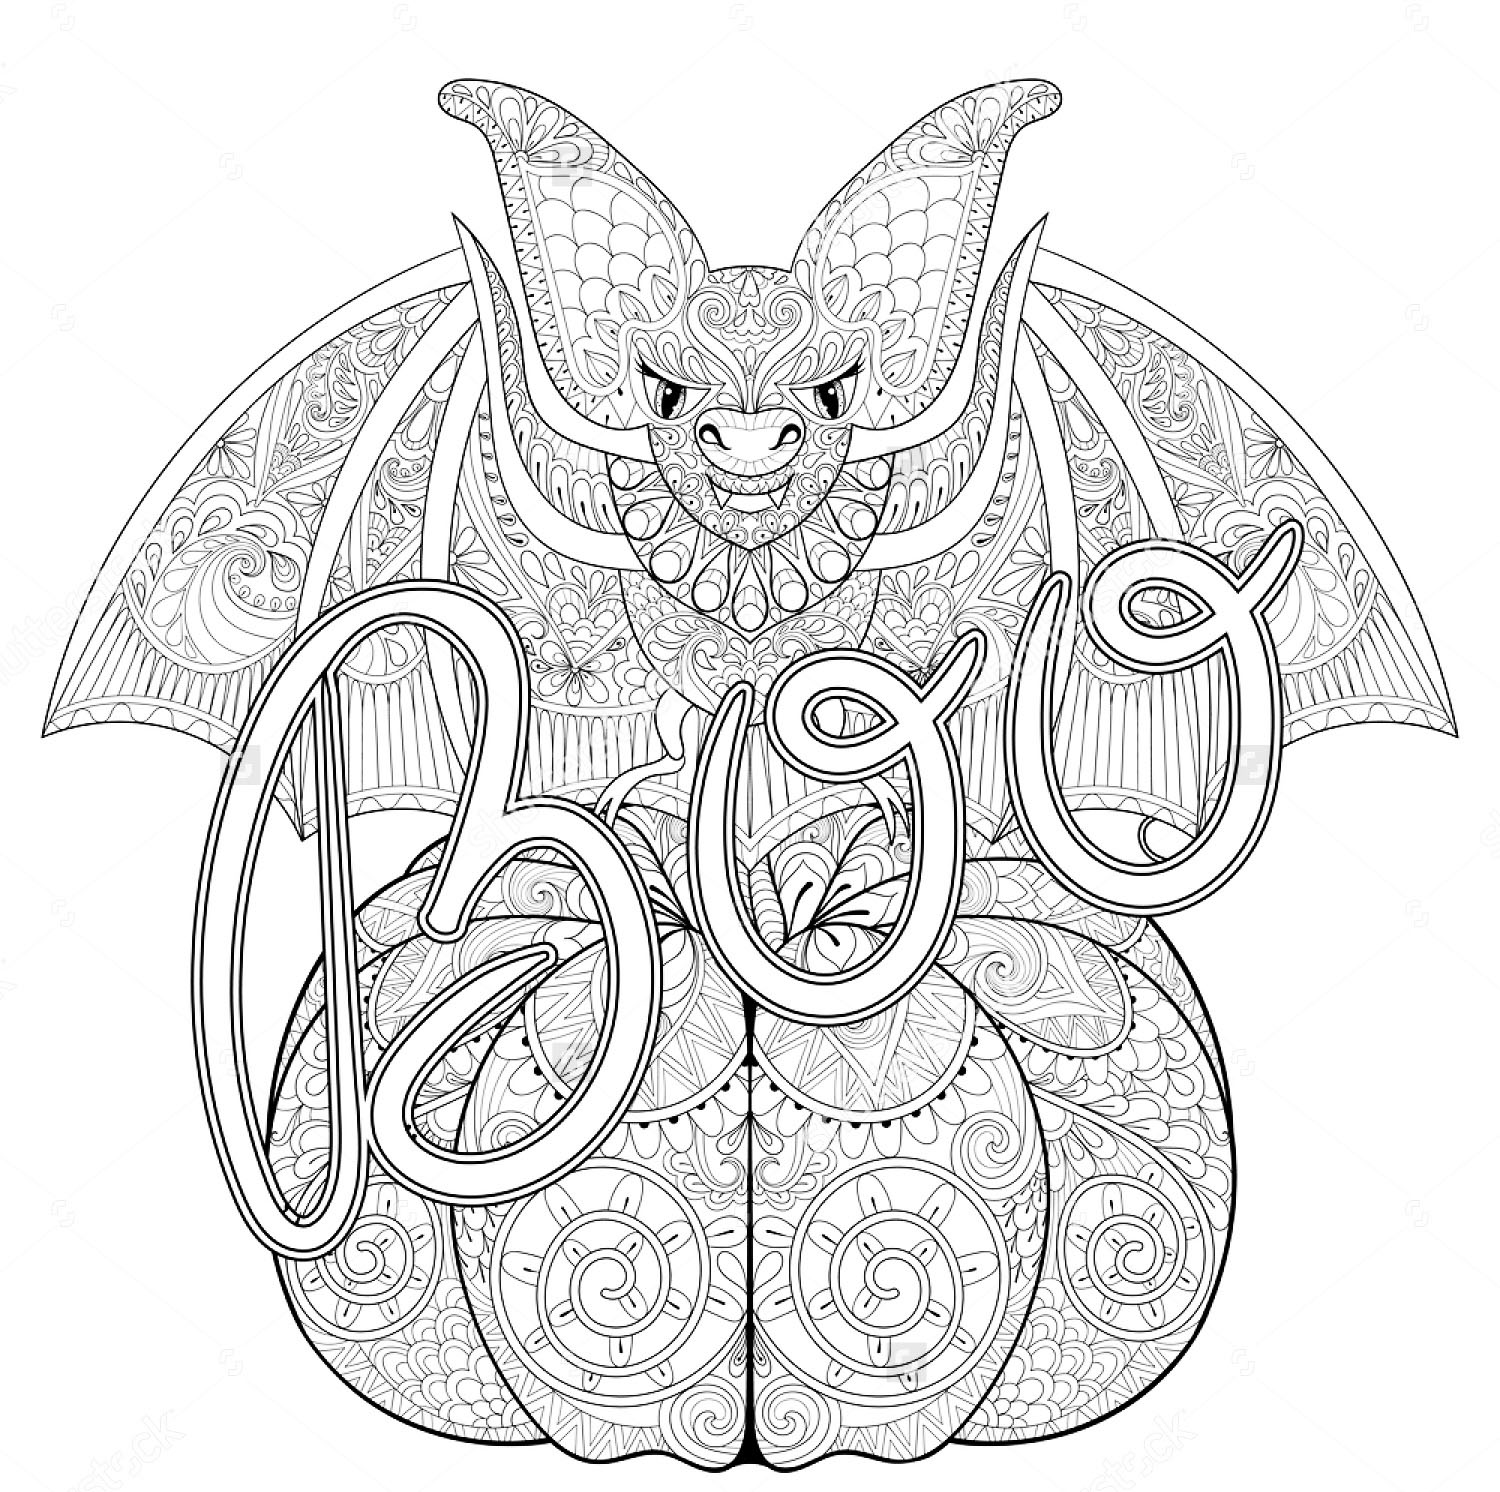 Simple Halloween coloring page for children